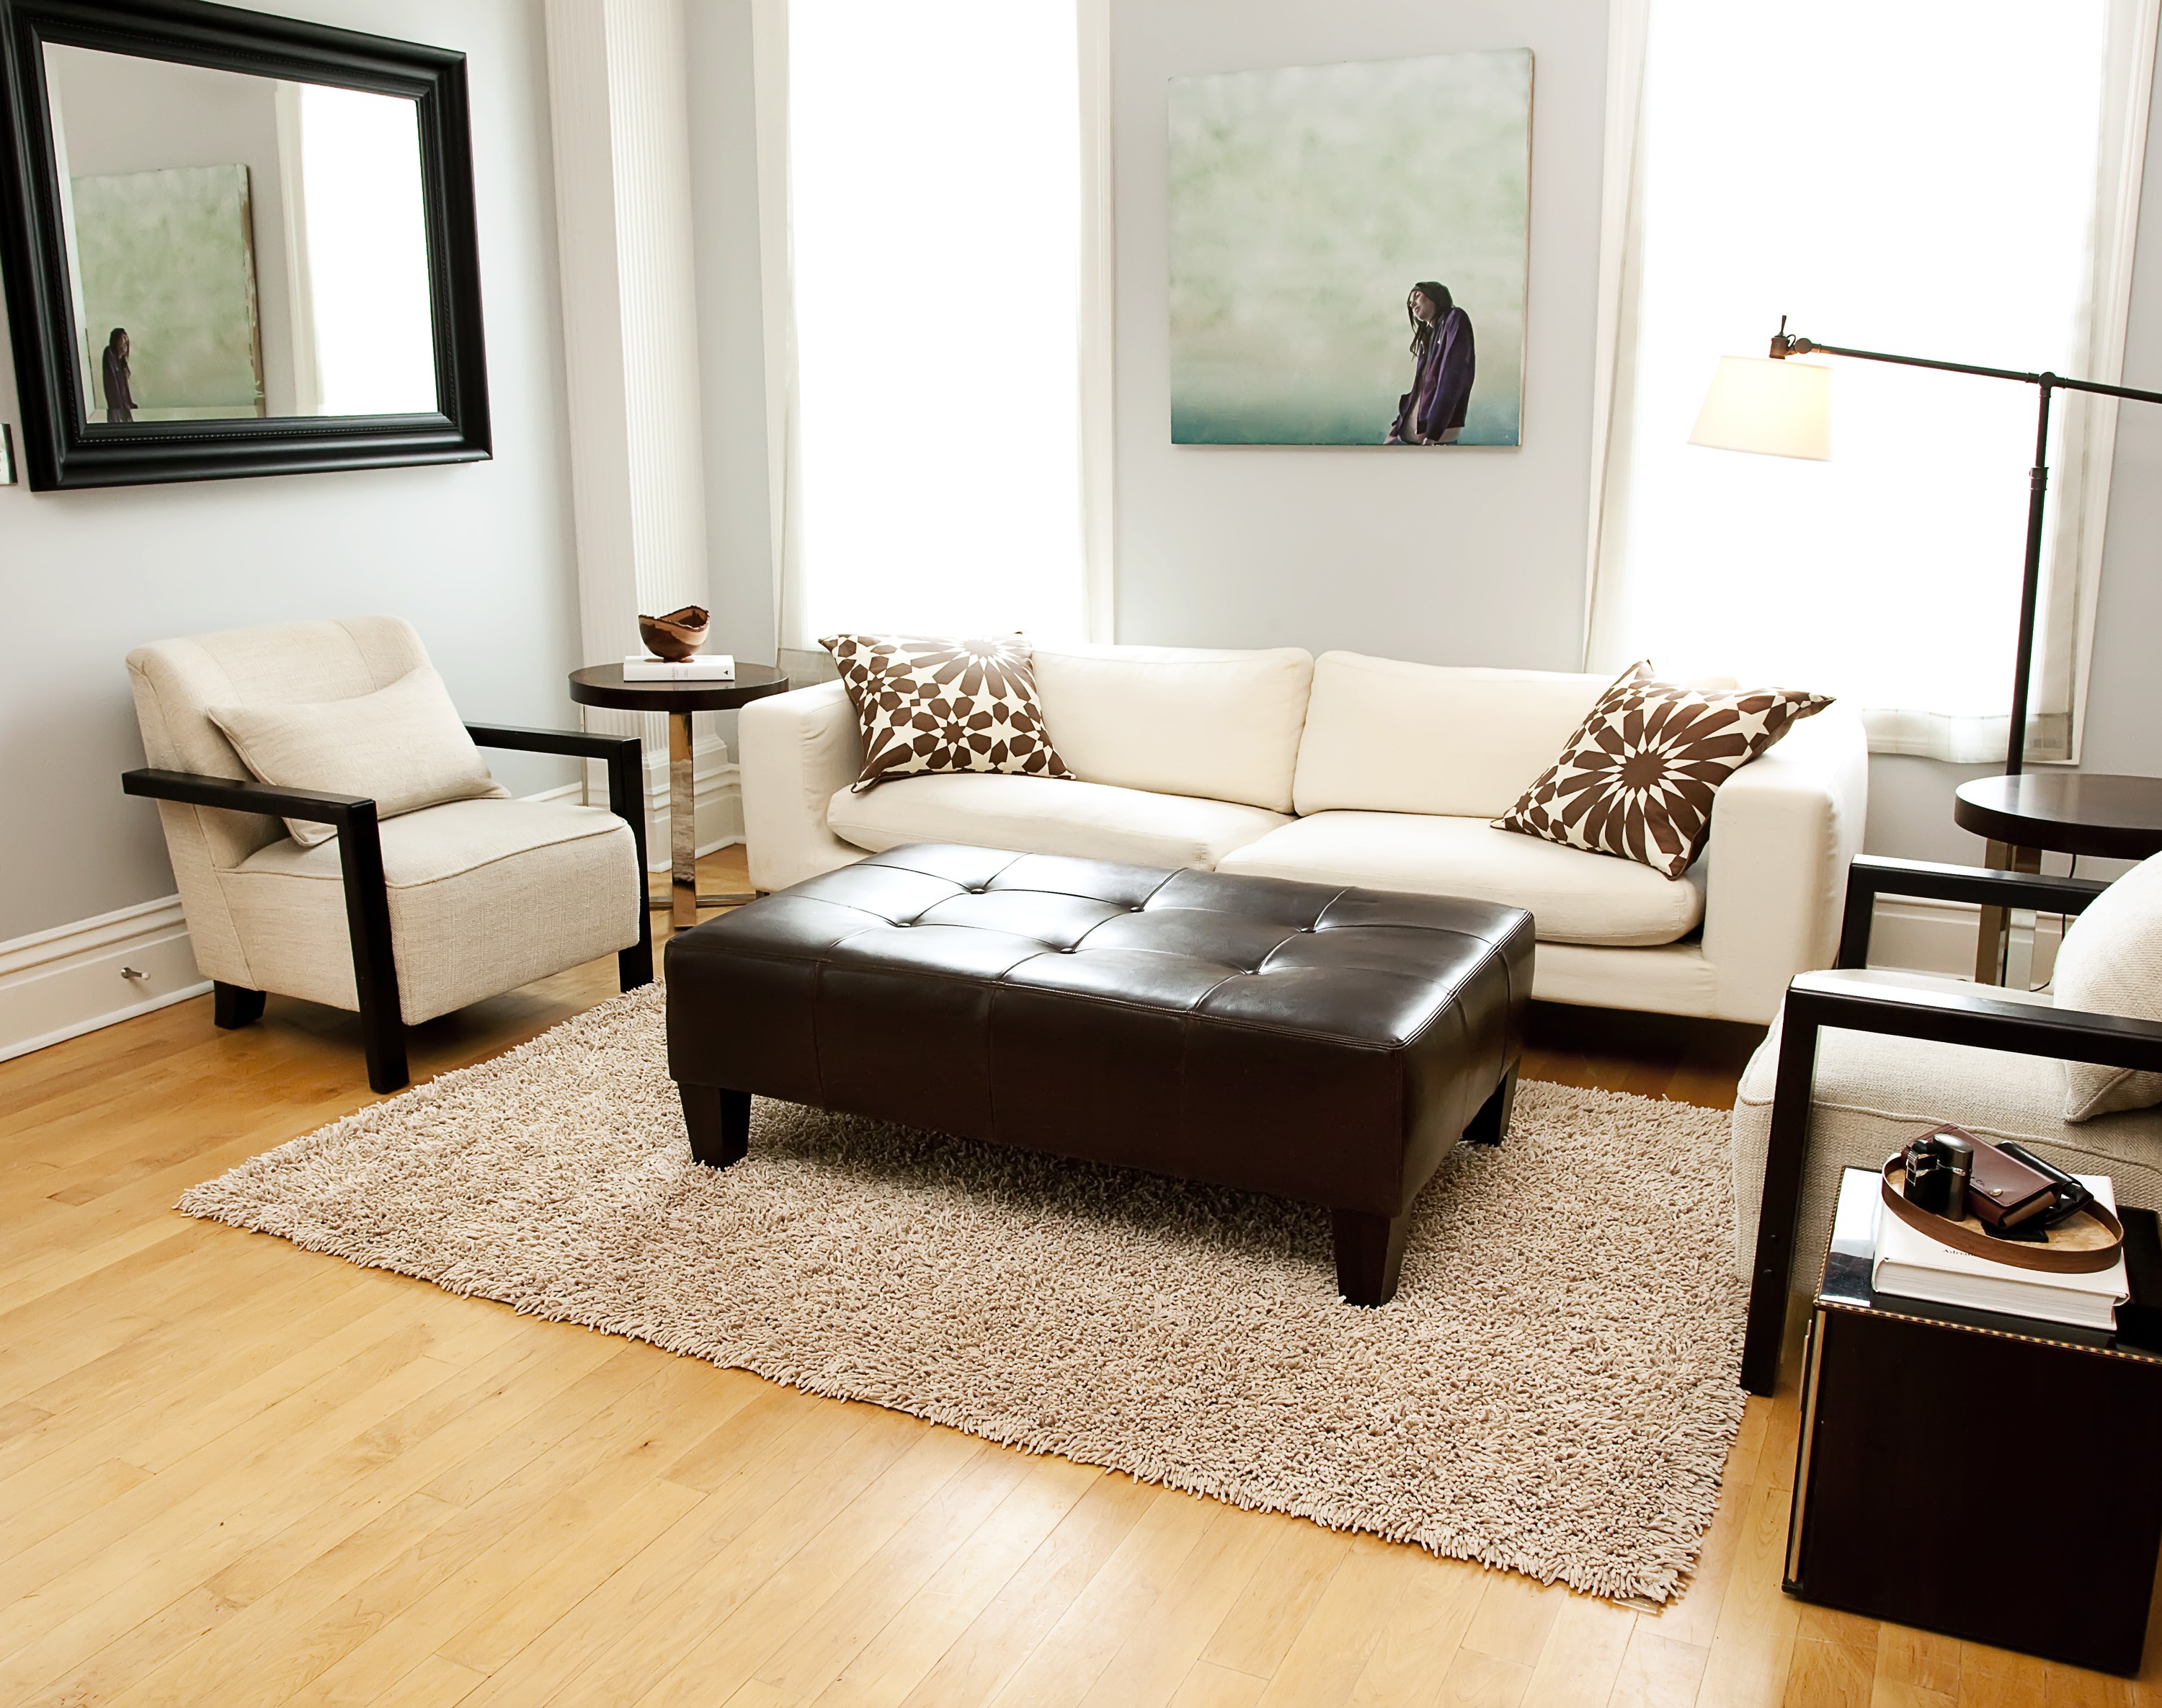 Buy Sisal Rugs Online To Augment The Décor Of Your Living Room